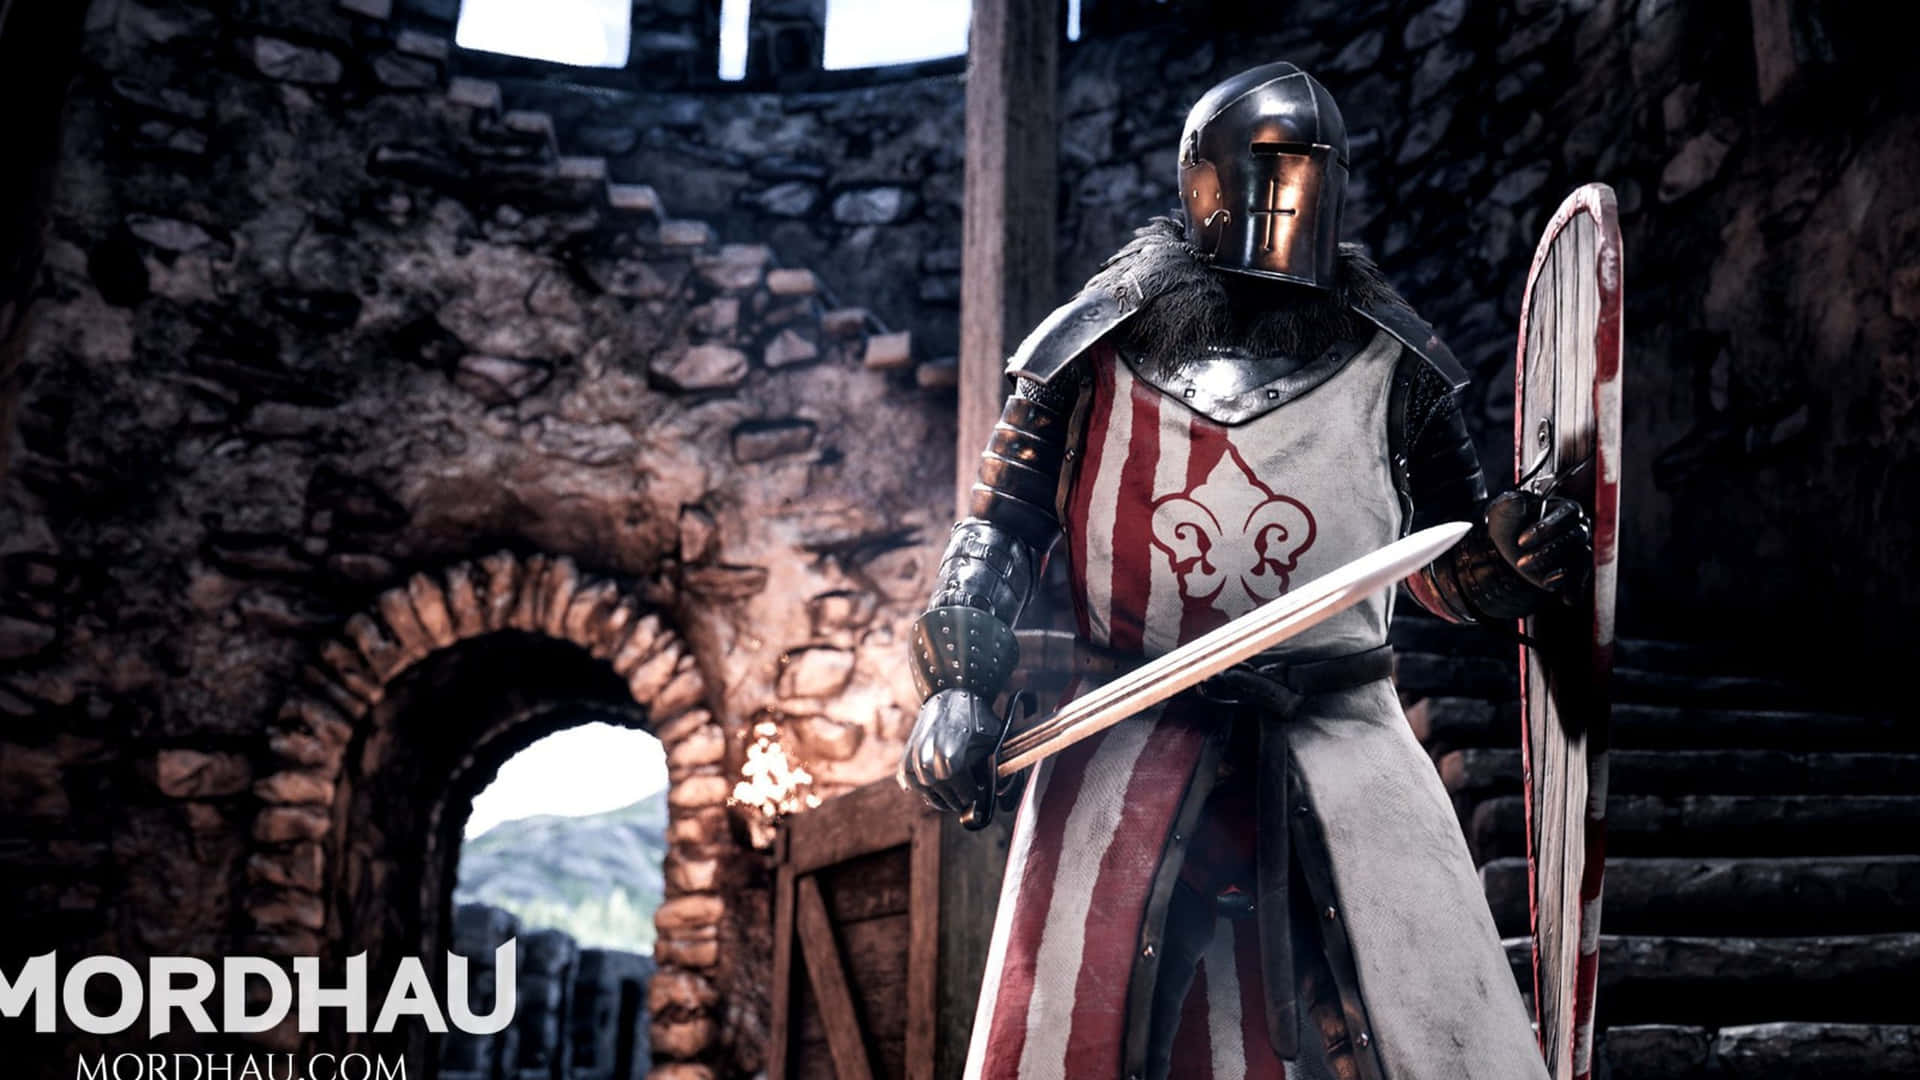 Take on the battlefield with the amazing combat of Mordhau at 1440p